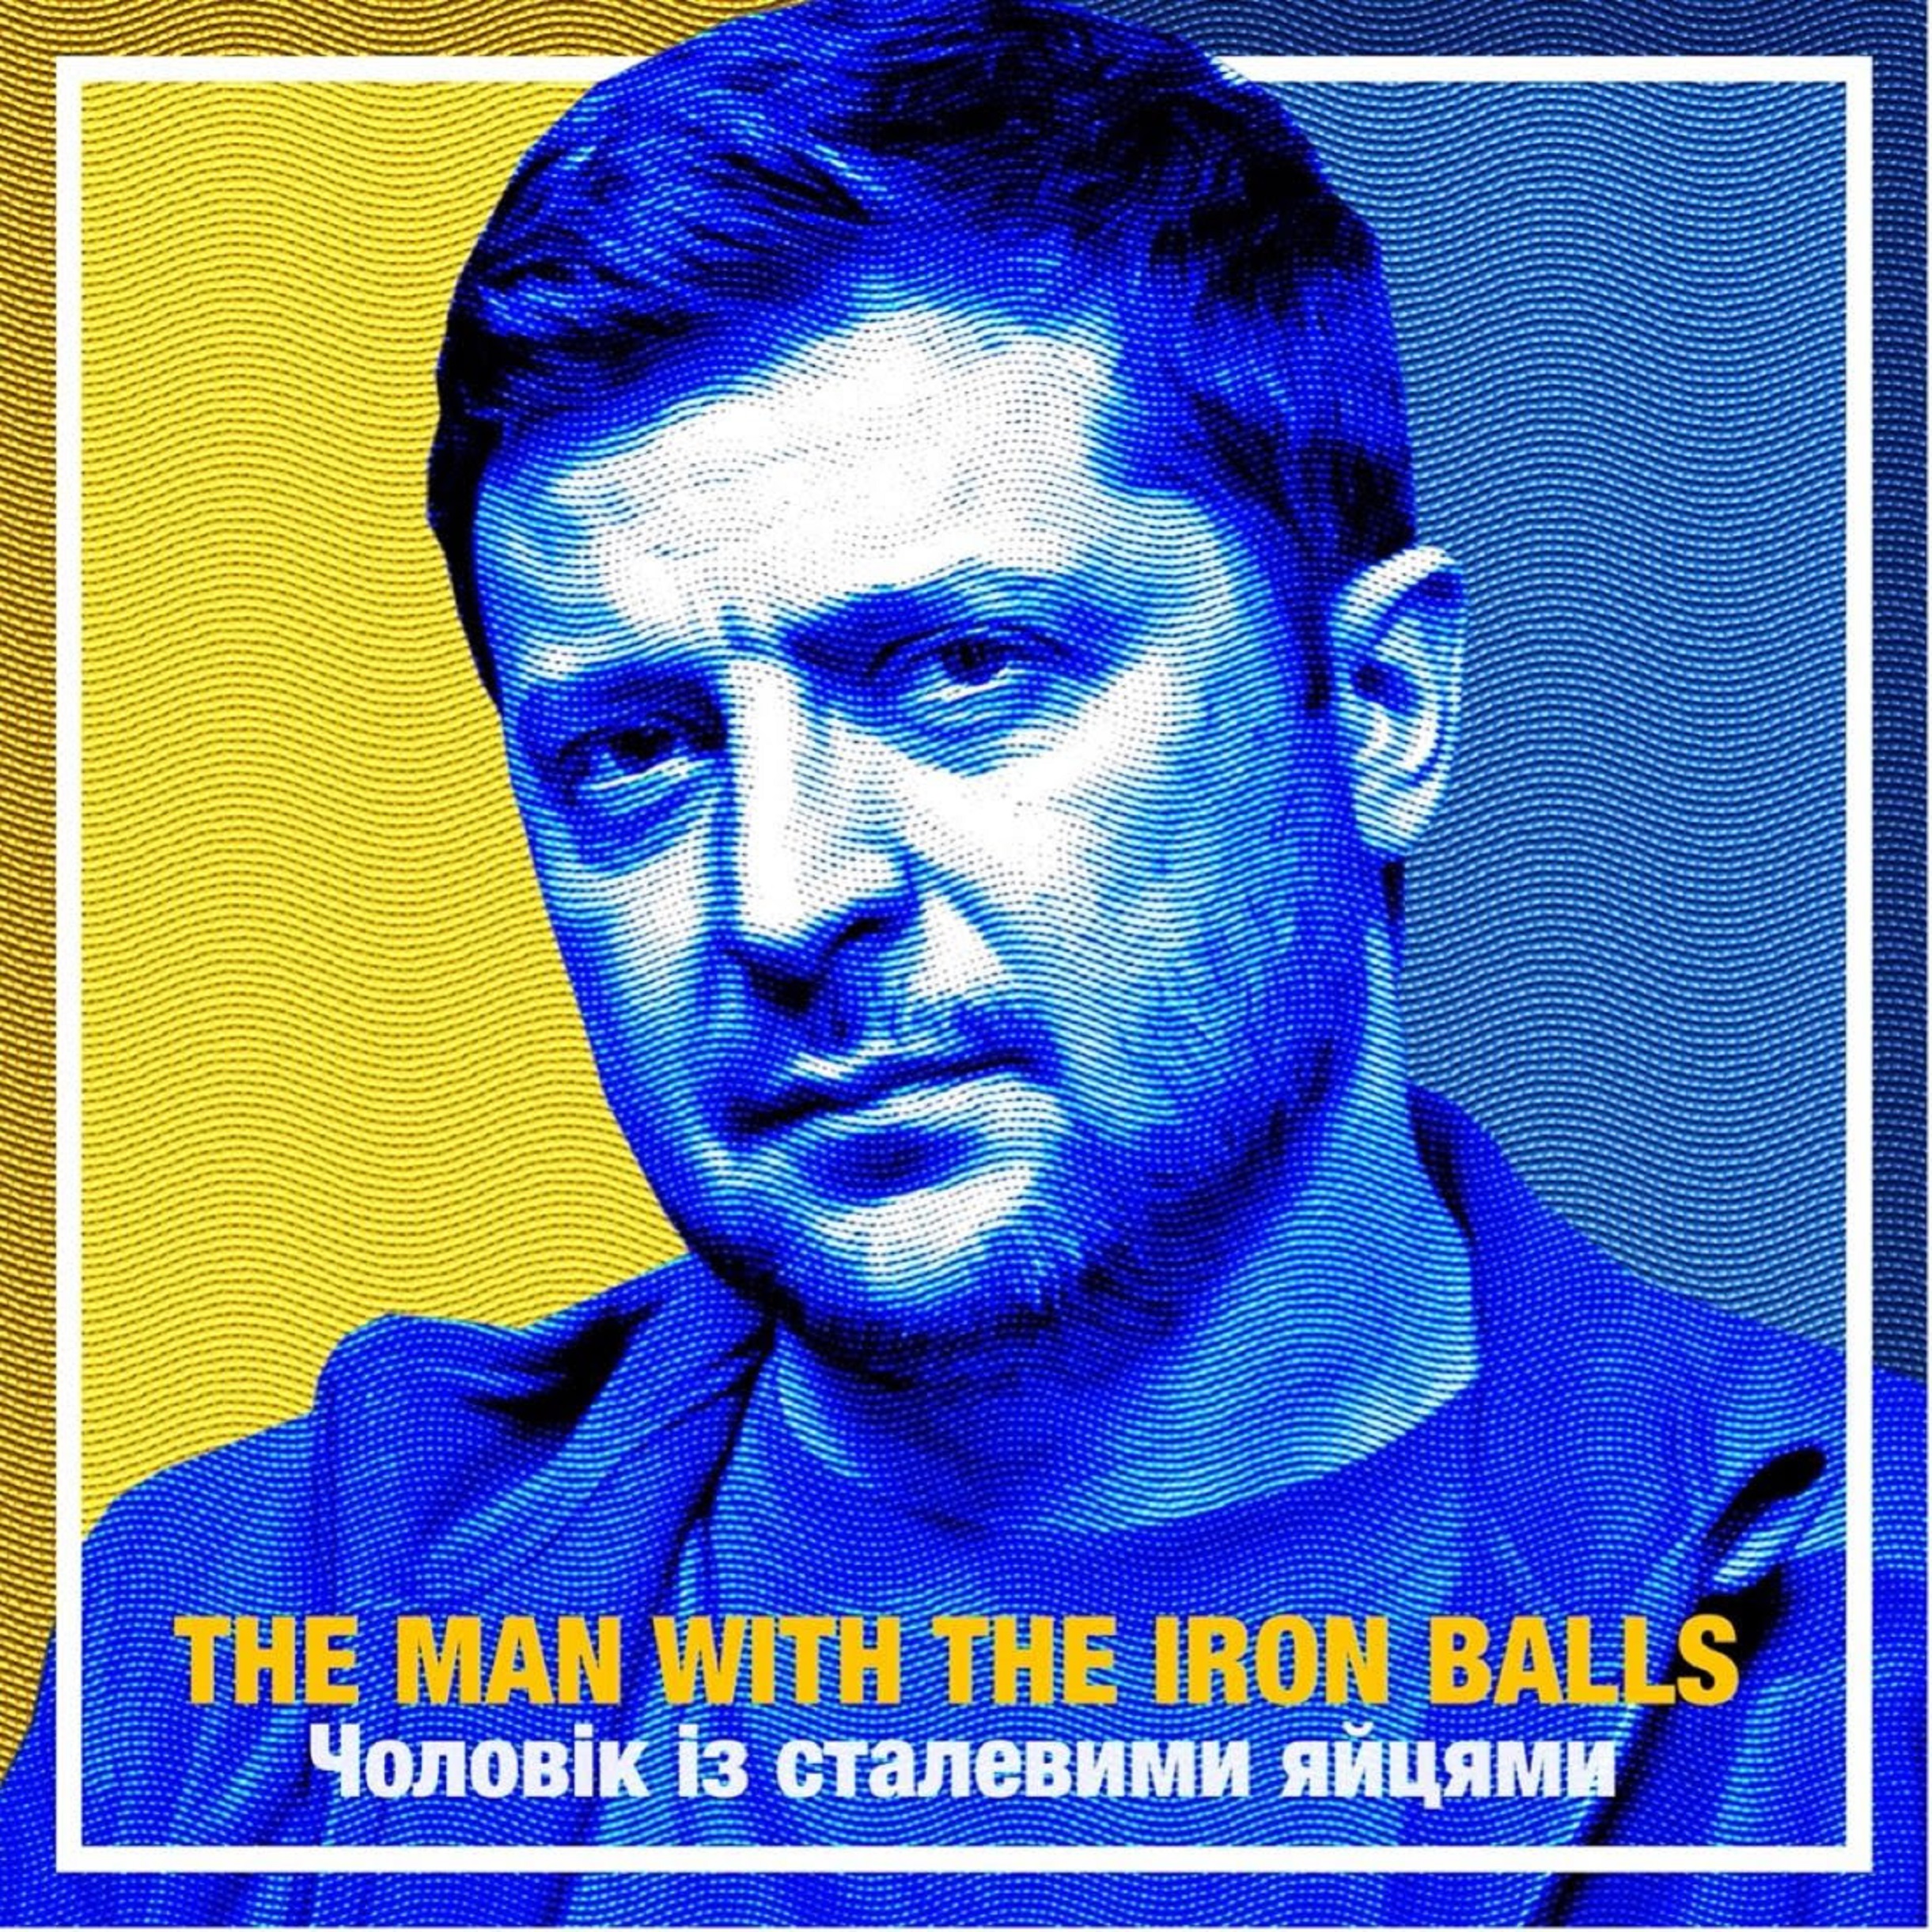 Top Artists Rally Support For Ukraine With “Zelensky: The Man With the Iron Balls